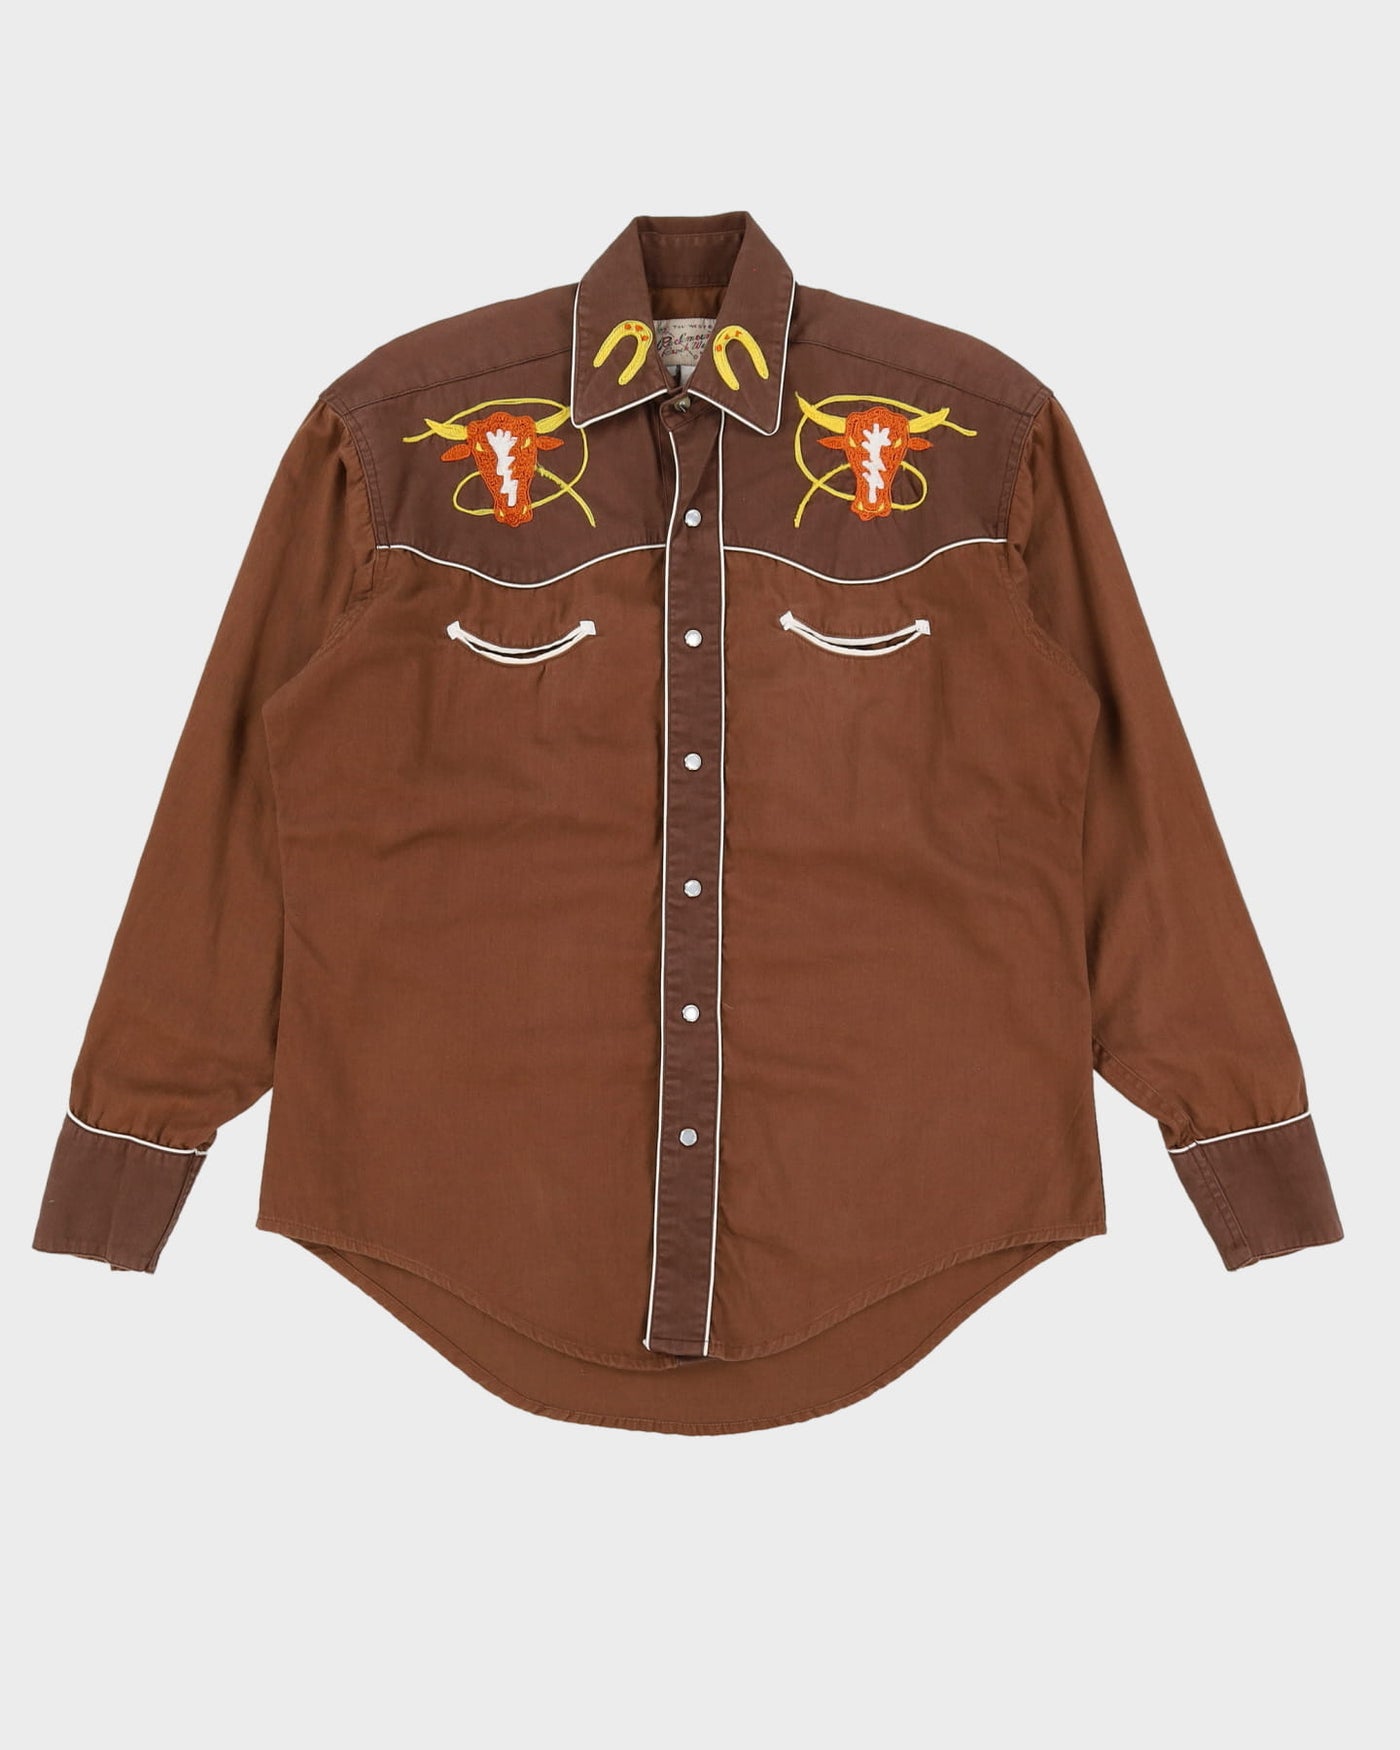 Vintage 1980s Brown Embroidered Western Shirt - L